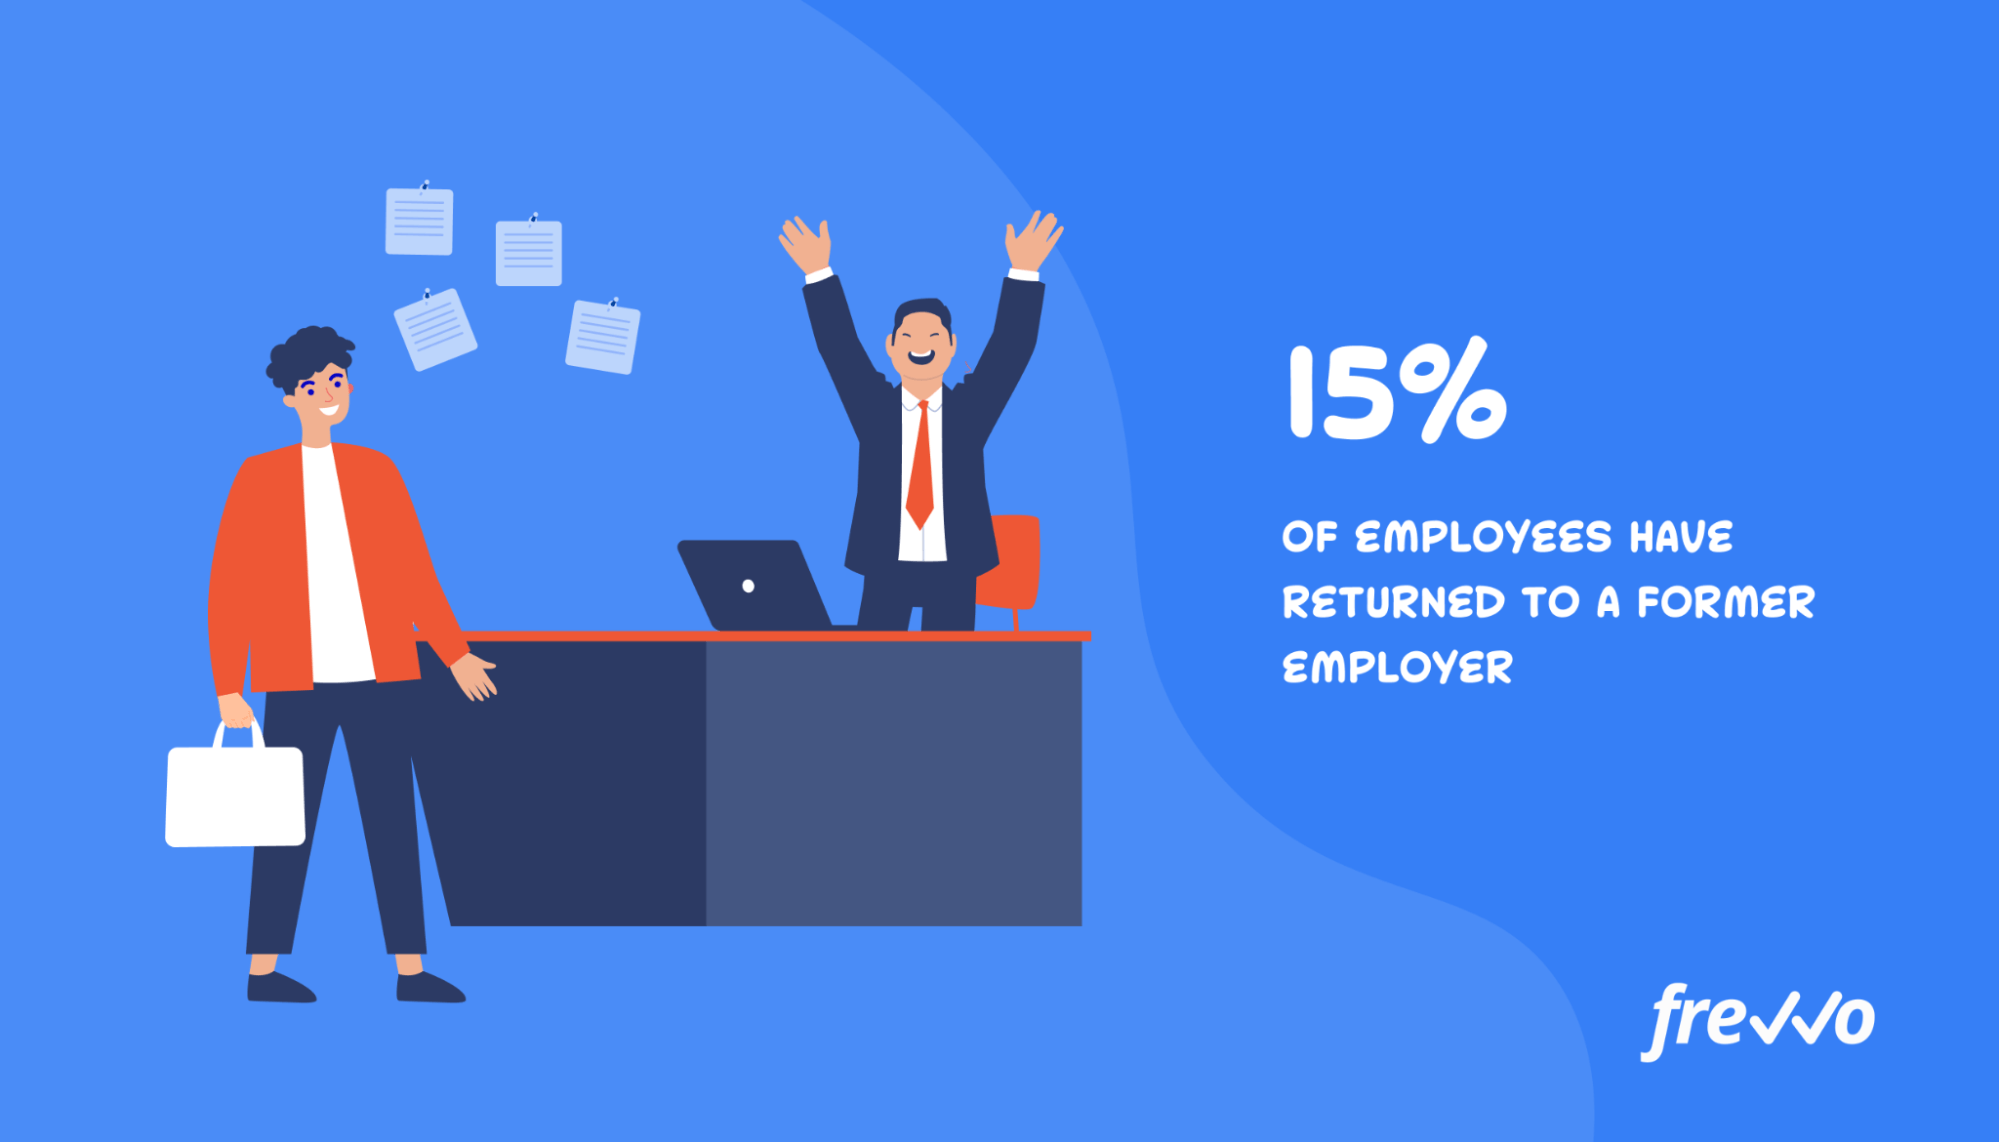 15% of employees have returned to a former employer